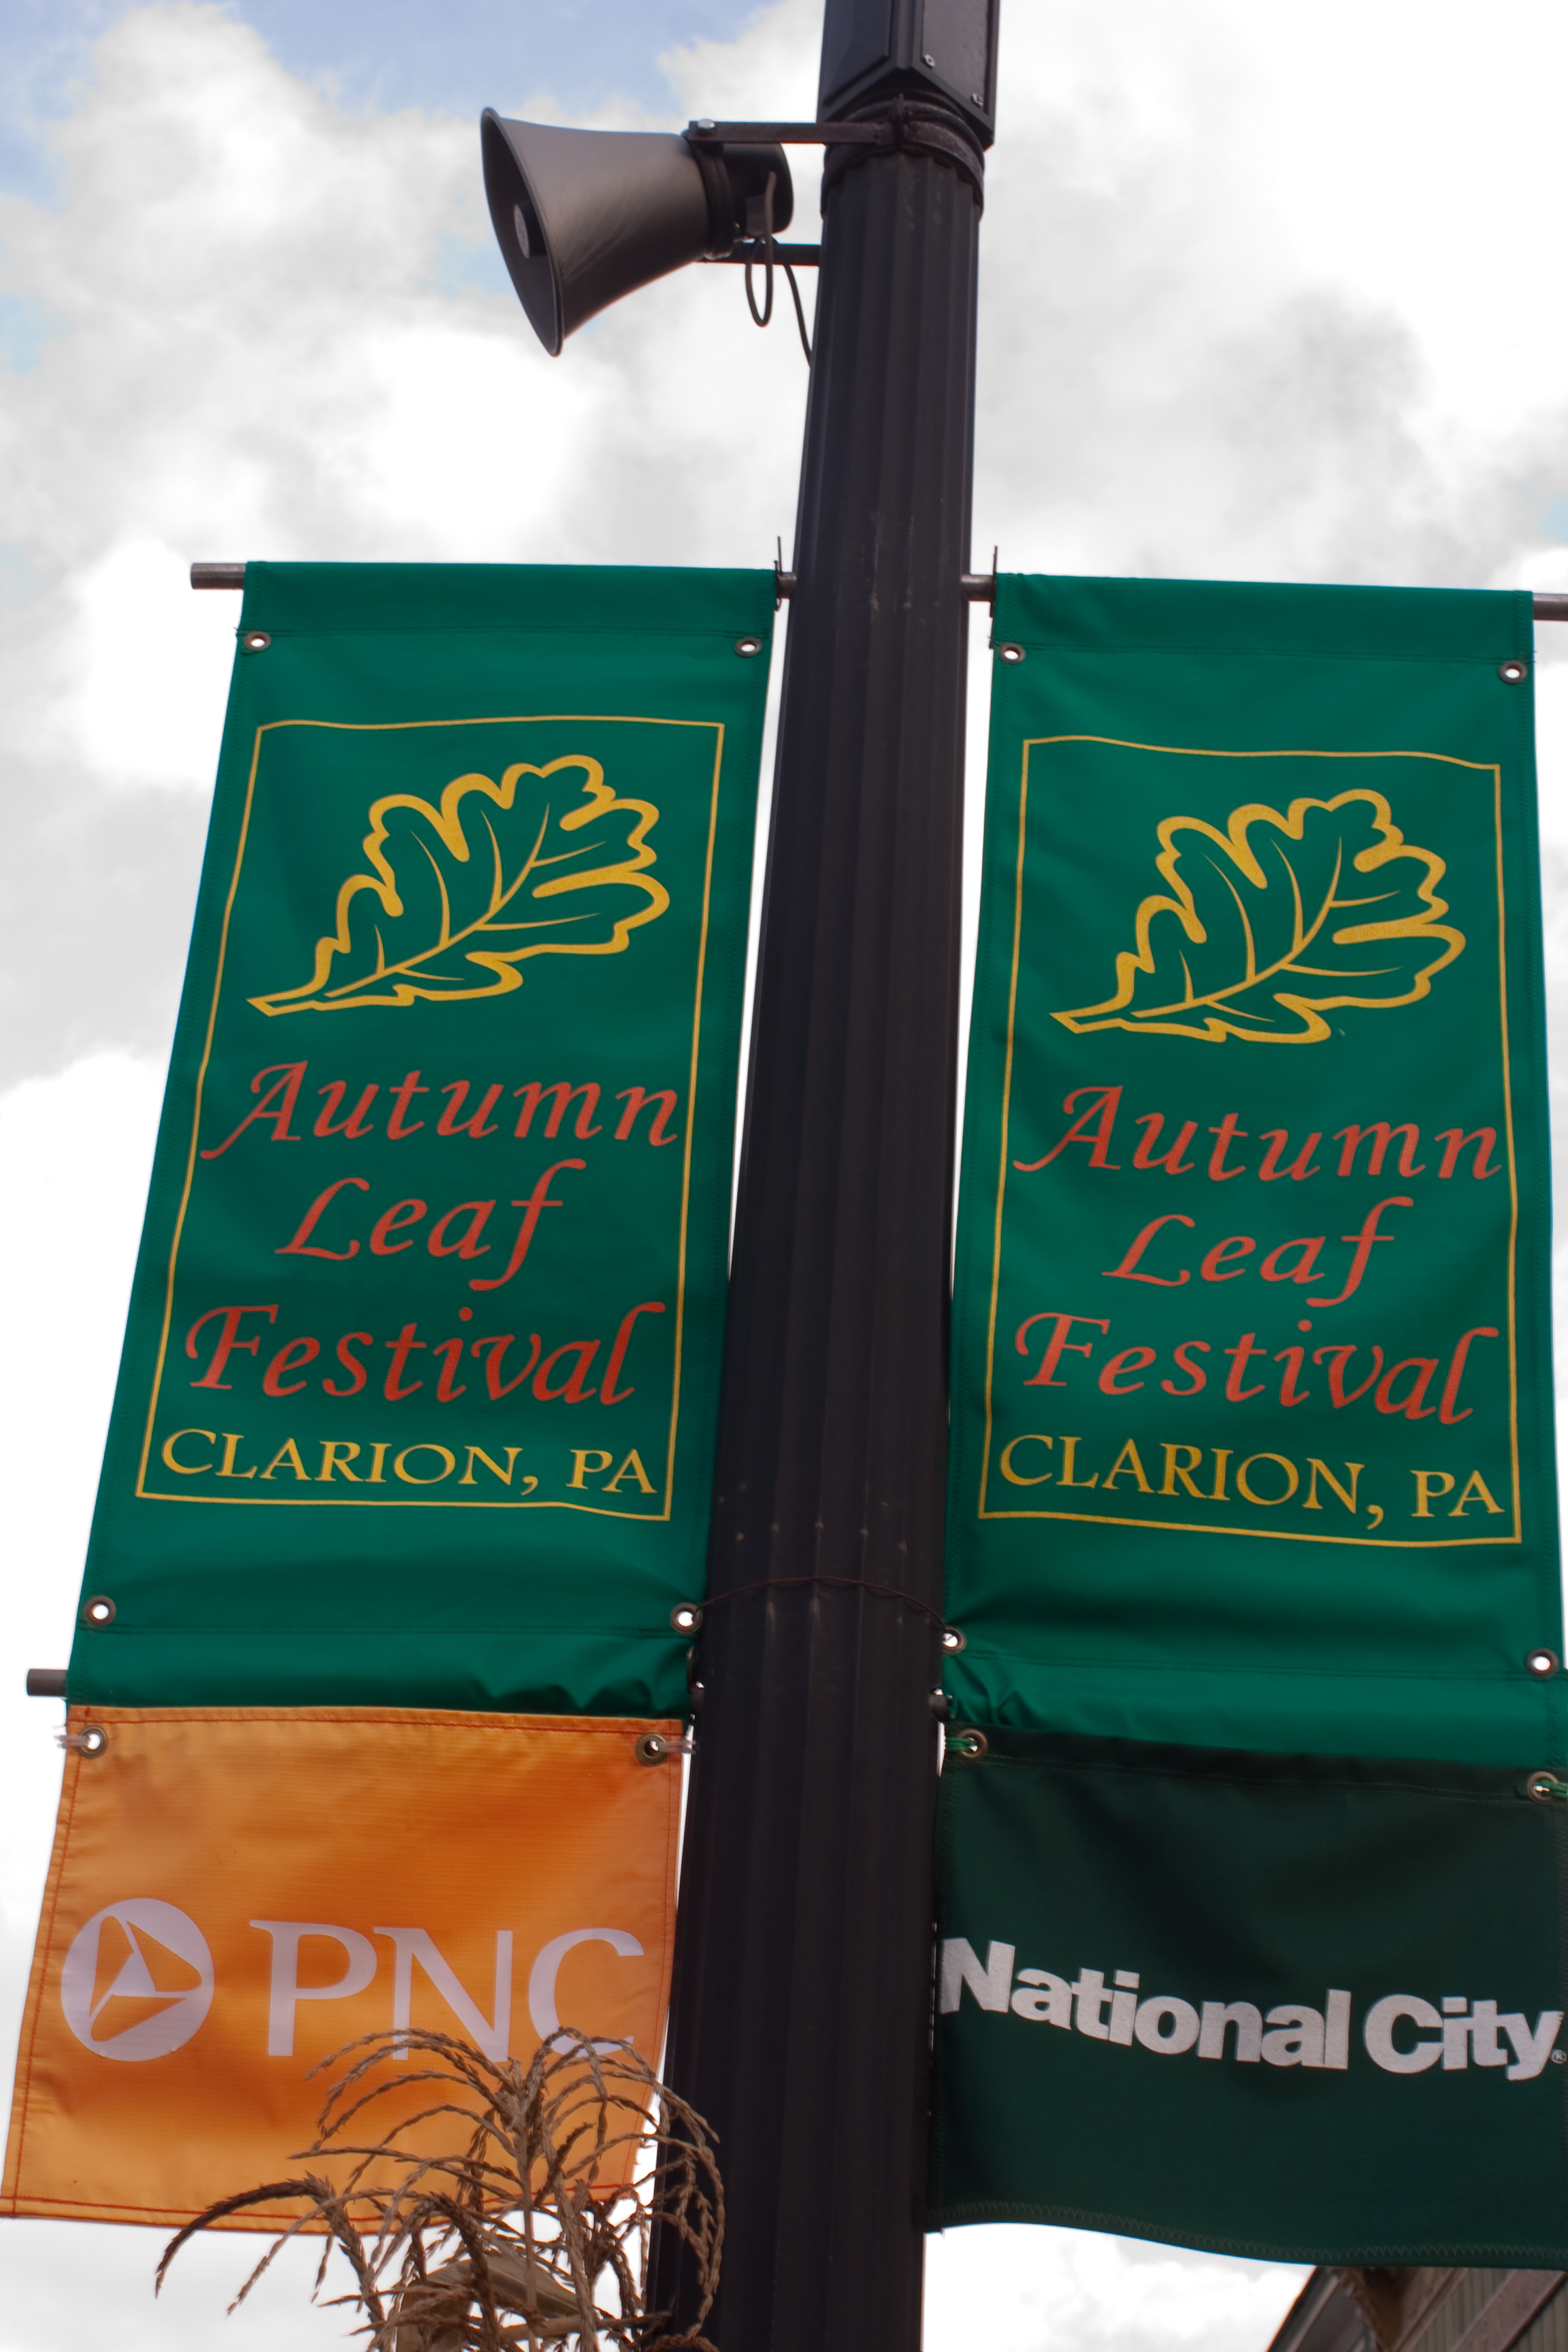 Street banners for the Autumn Leaf Festival